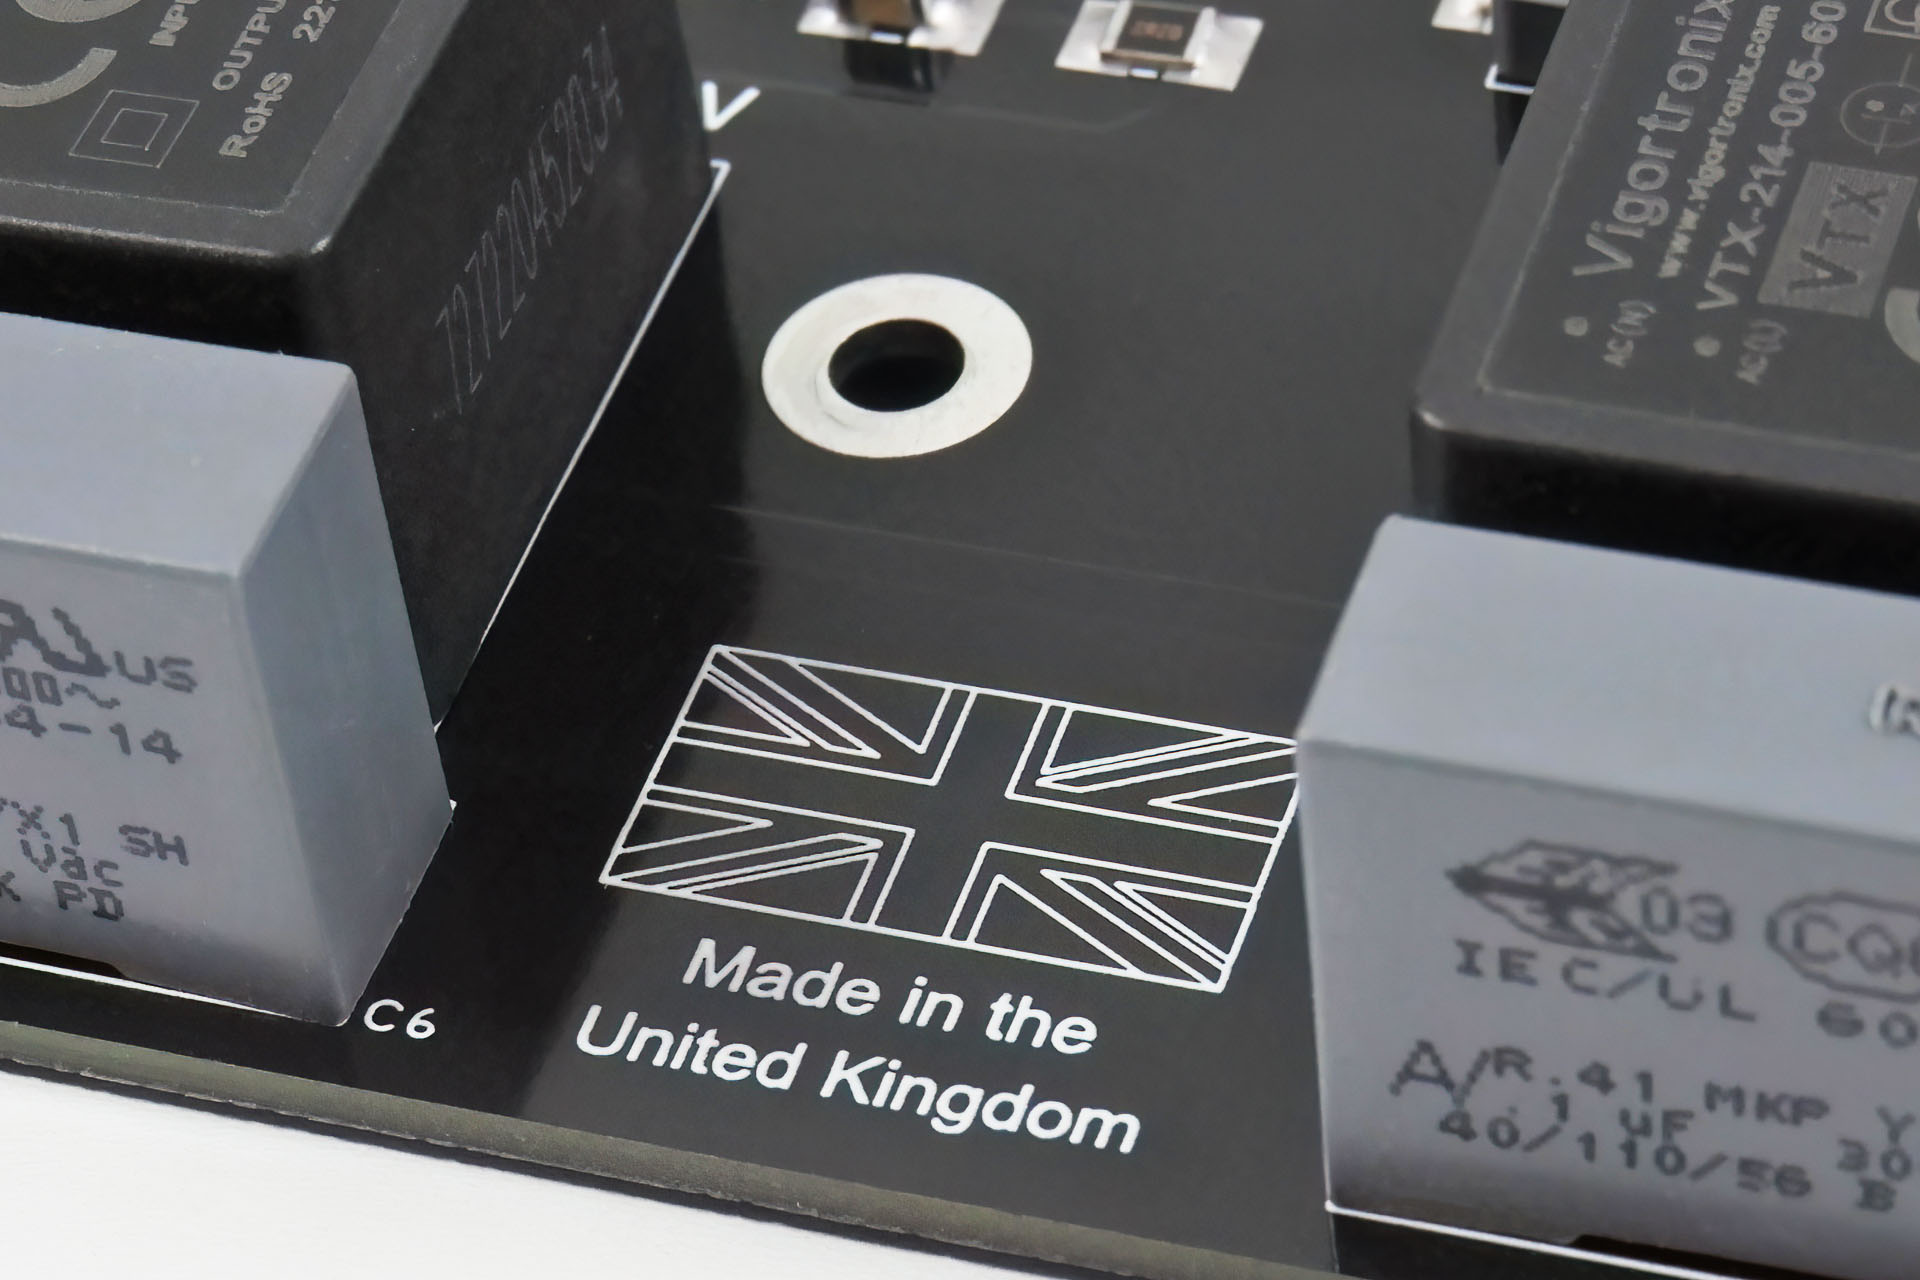 Galaxy modular switched-mode power supply for the Behringer Ultracurve Pro made in the UK